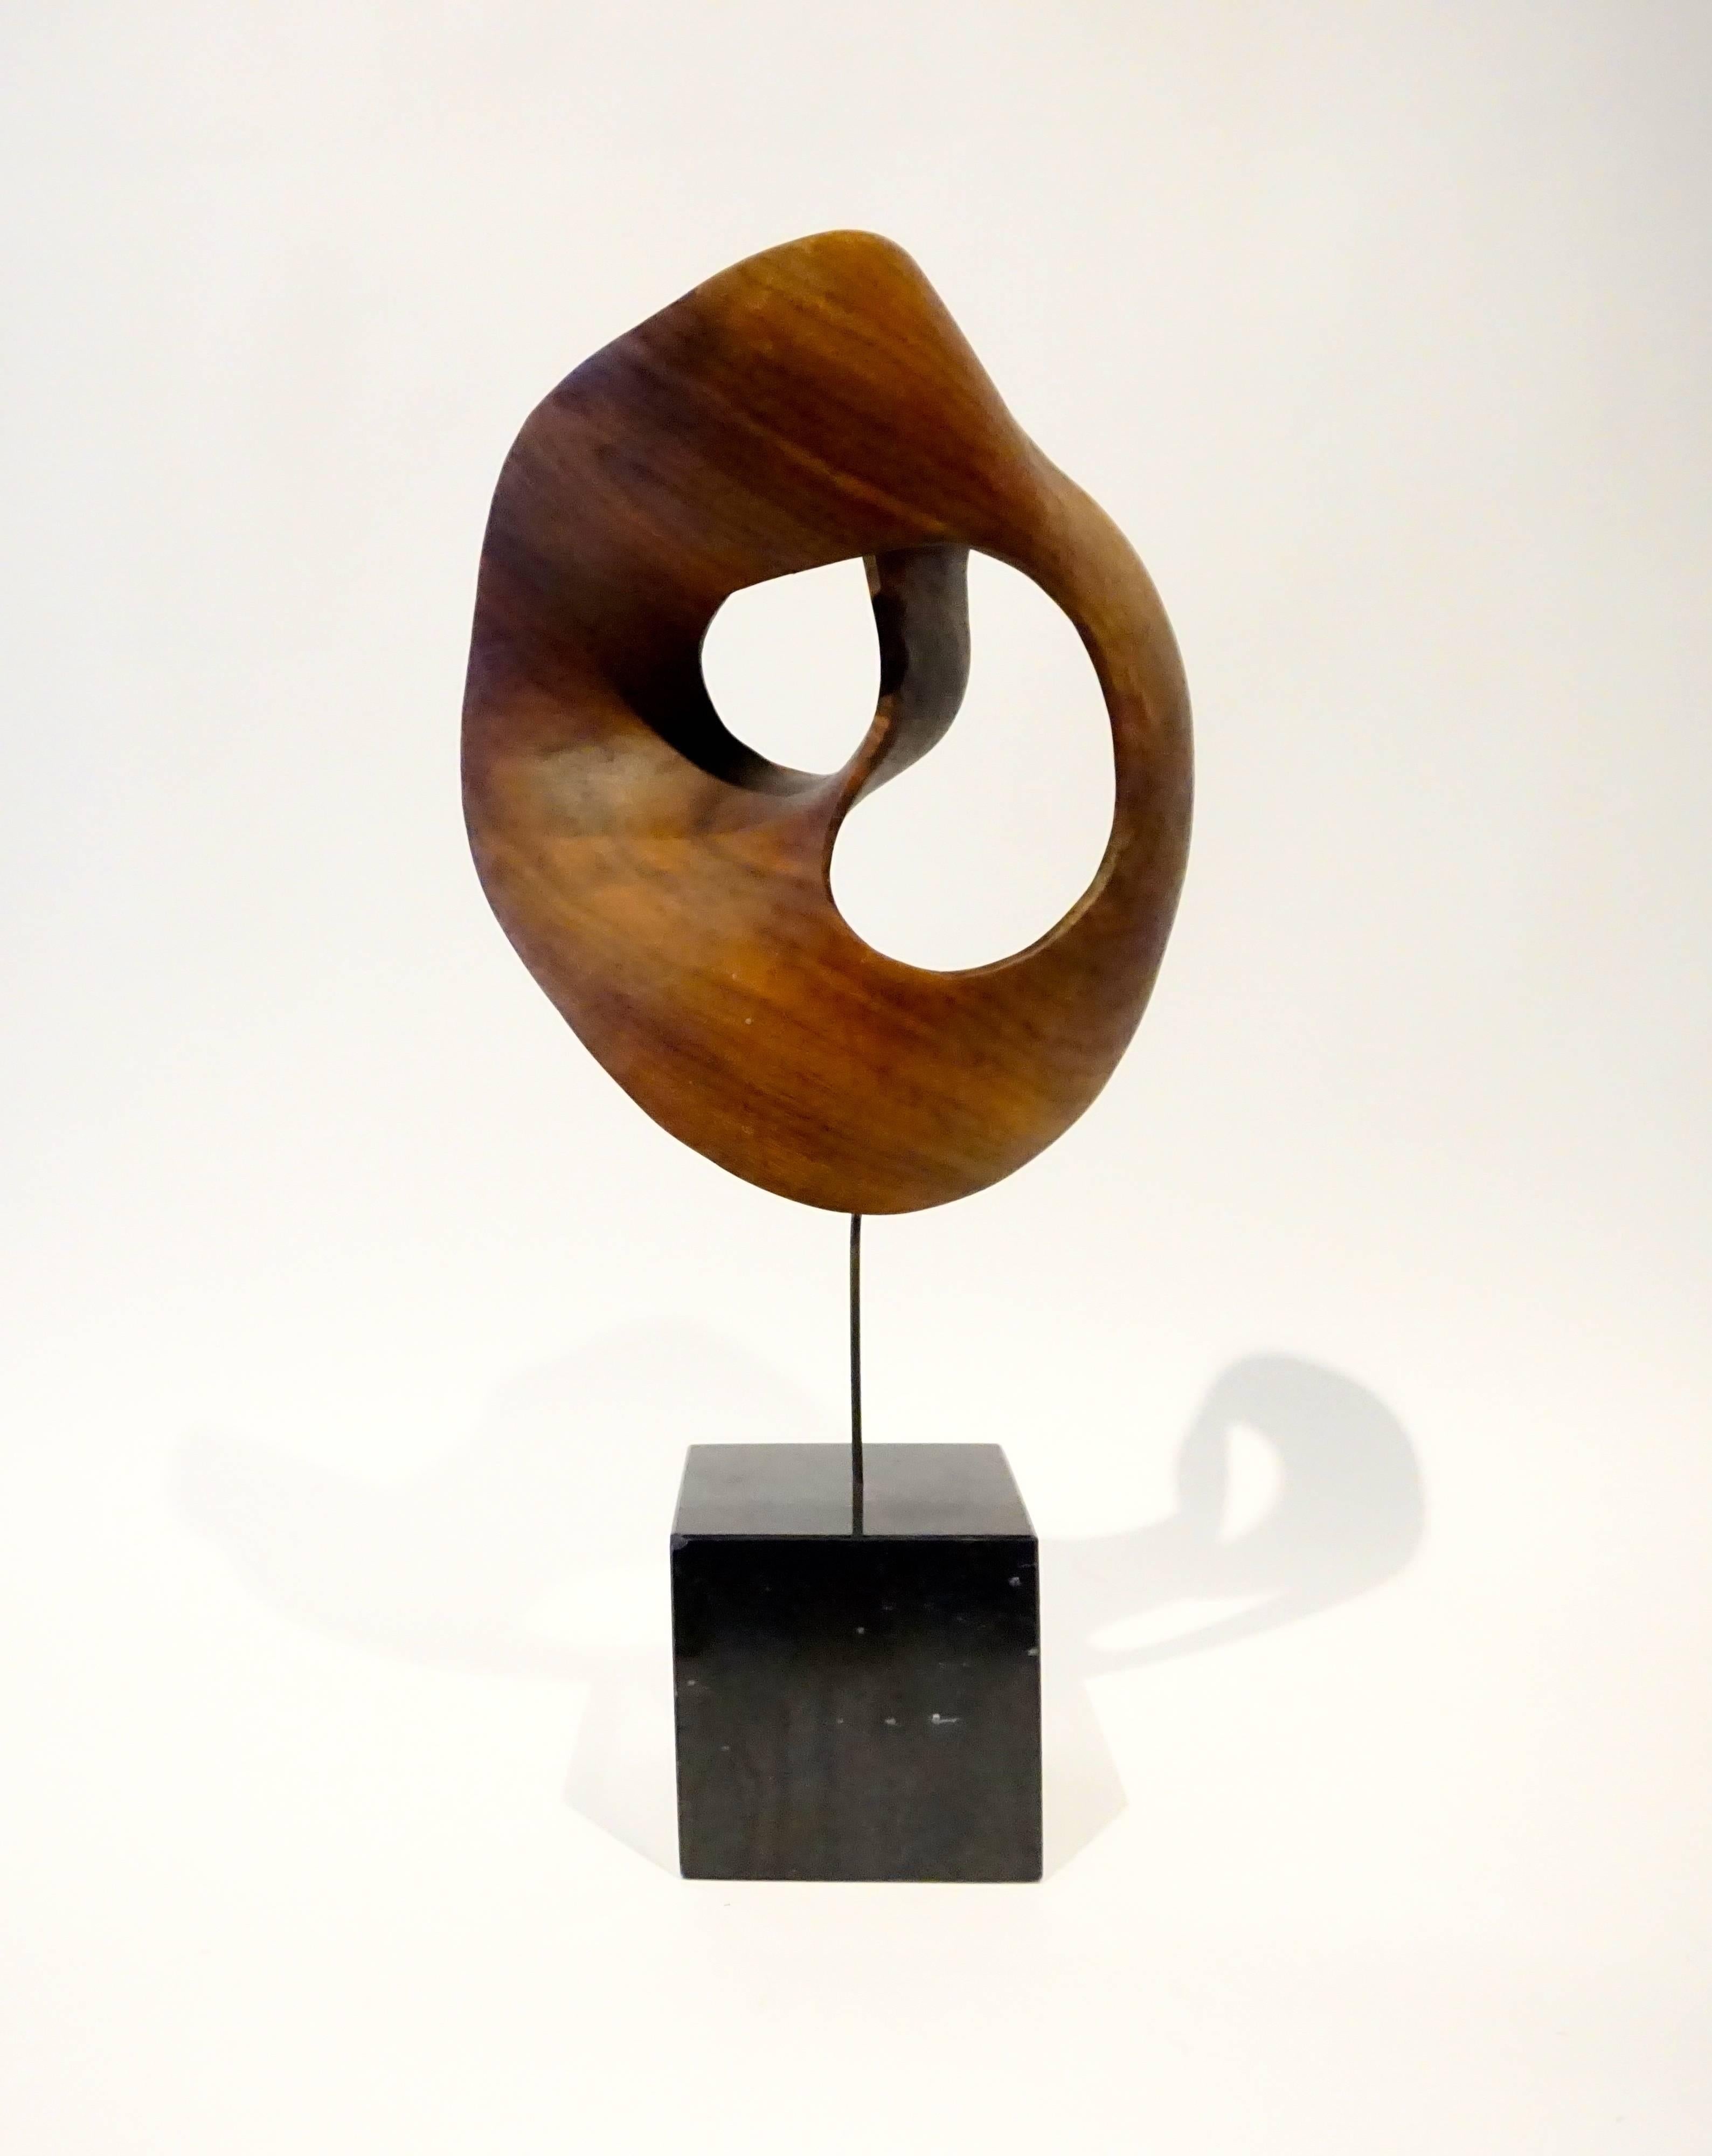 Late 20th Century Carved Wooden Swirl Sculpture by American Artist Thomas Woodward C. 1990's